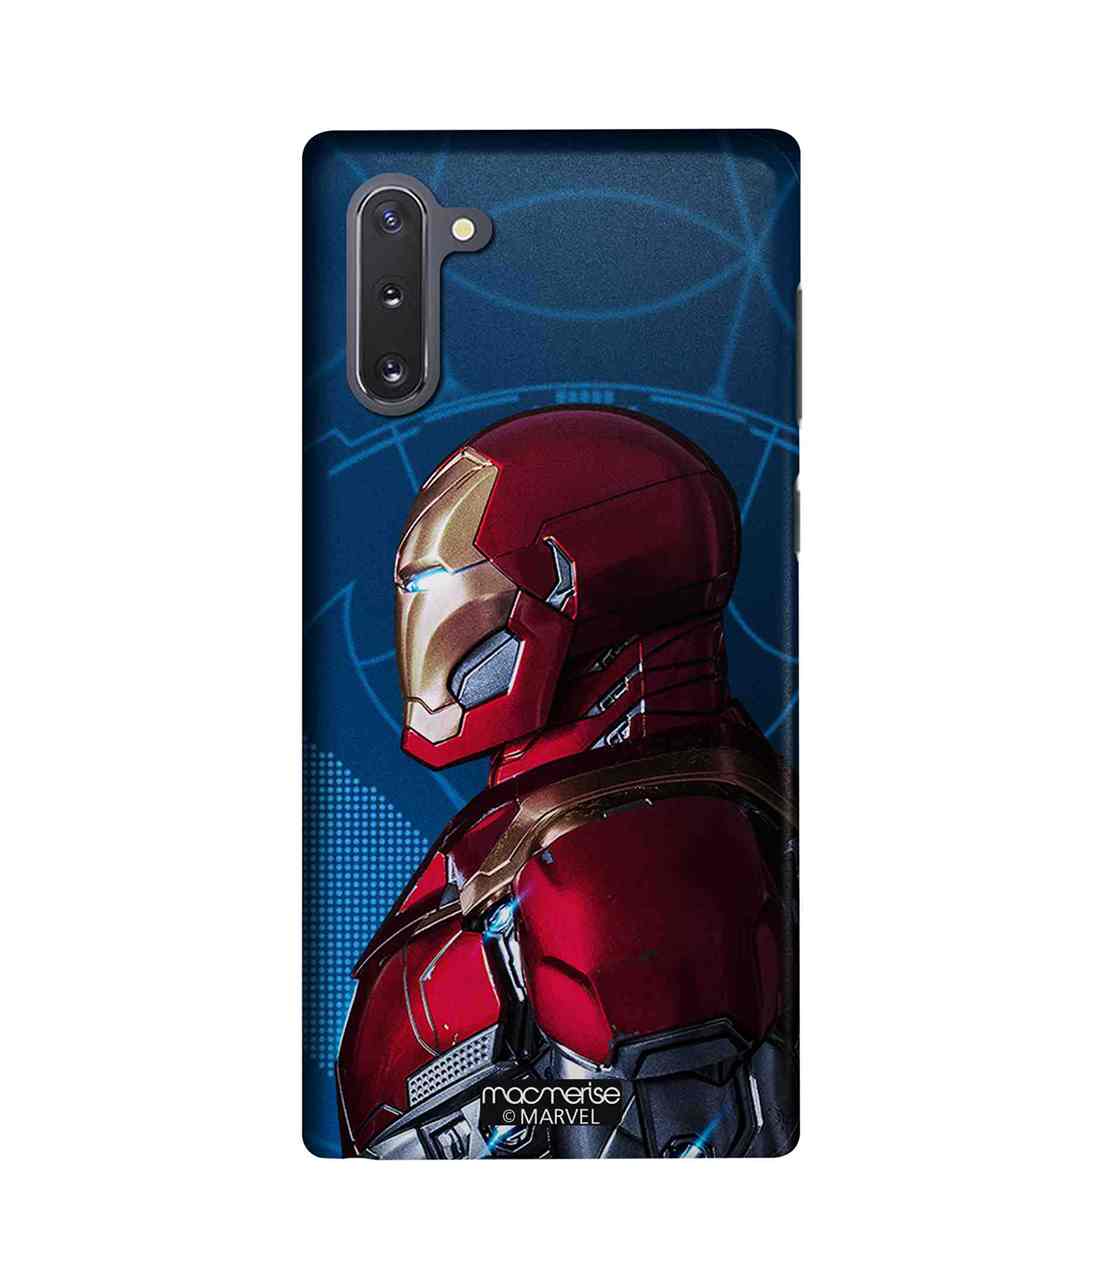 Buy Iron Man side Armor - Sleek Phone Case for Samsung Note10 Online